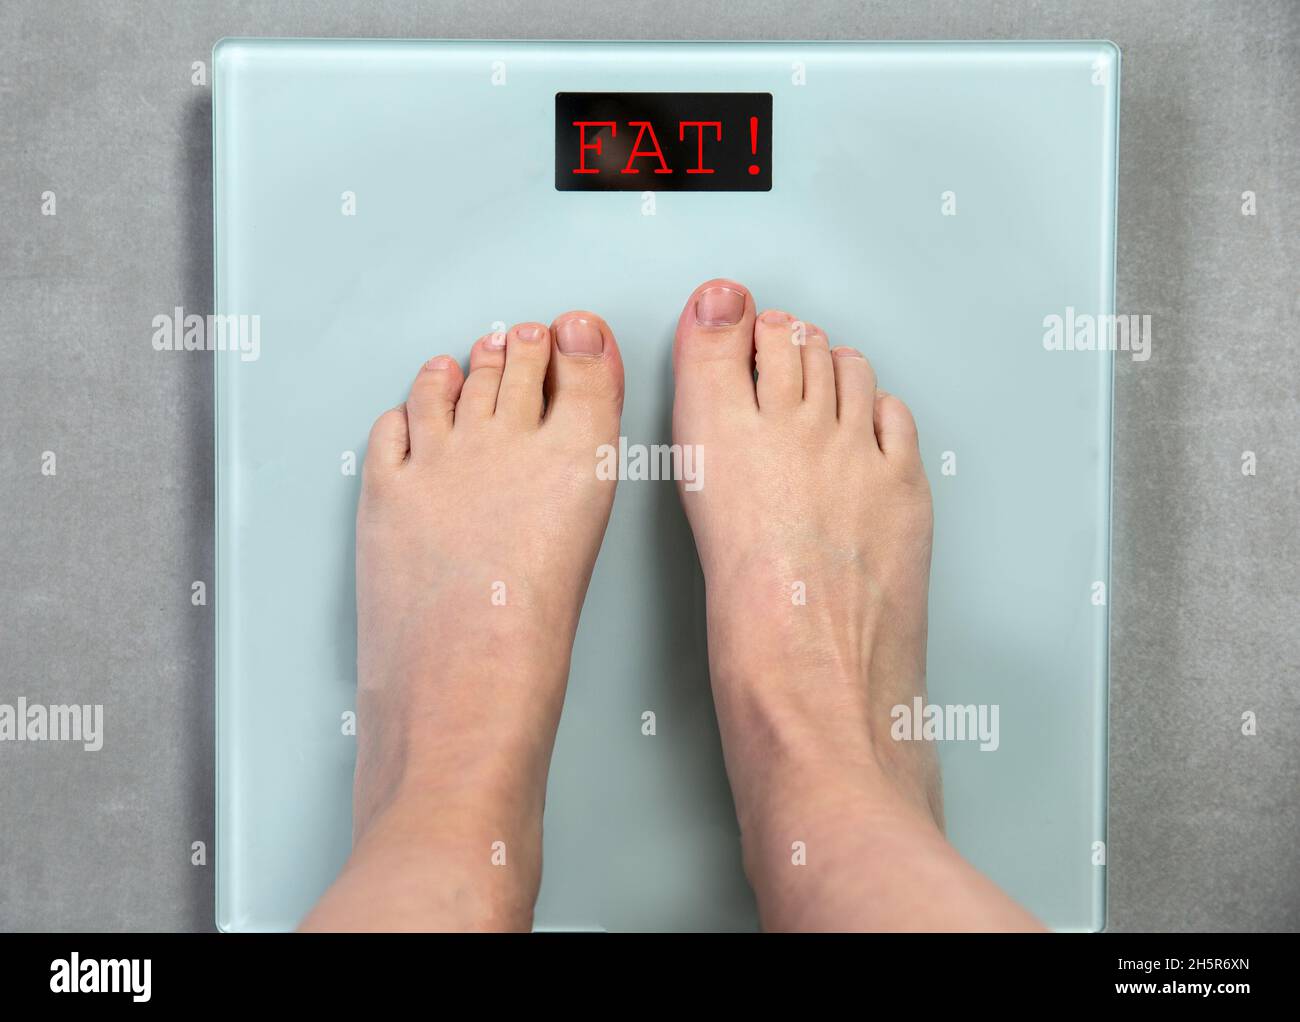 https://c8.alamy.com/comp/2H5R6XN/feet-on-digital-weight-scale-with-word-fat-top-view-message-unhealthy-lifestylelose-weight-message-help-concept-2H5R6XN.jpg